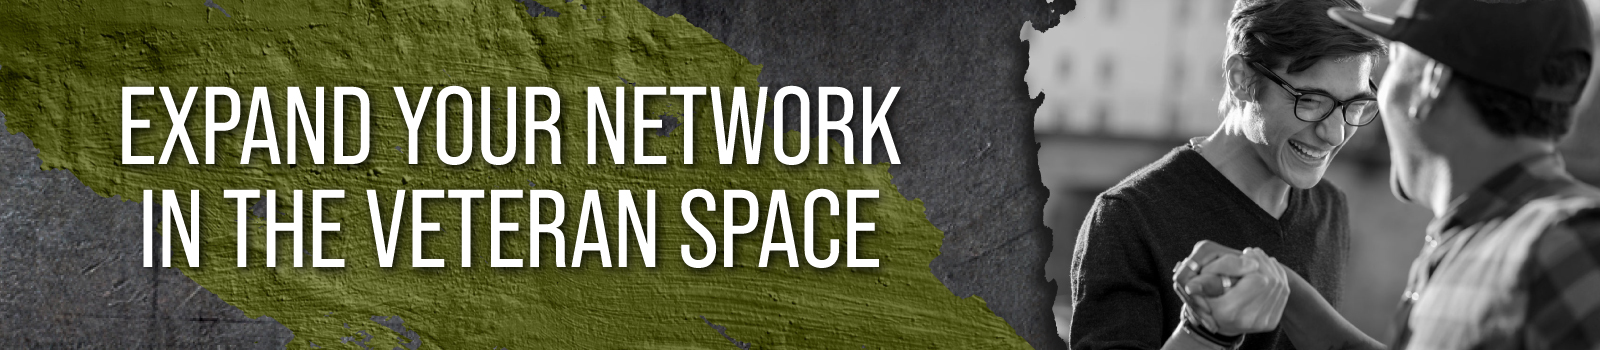 Expand Your Network in the Veteran Space 